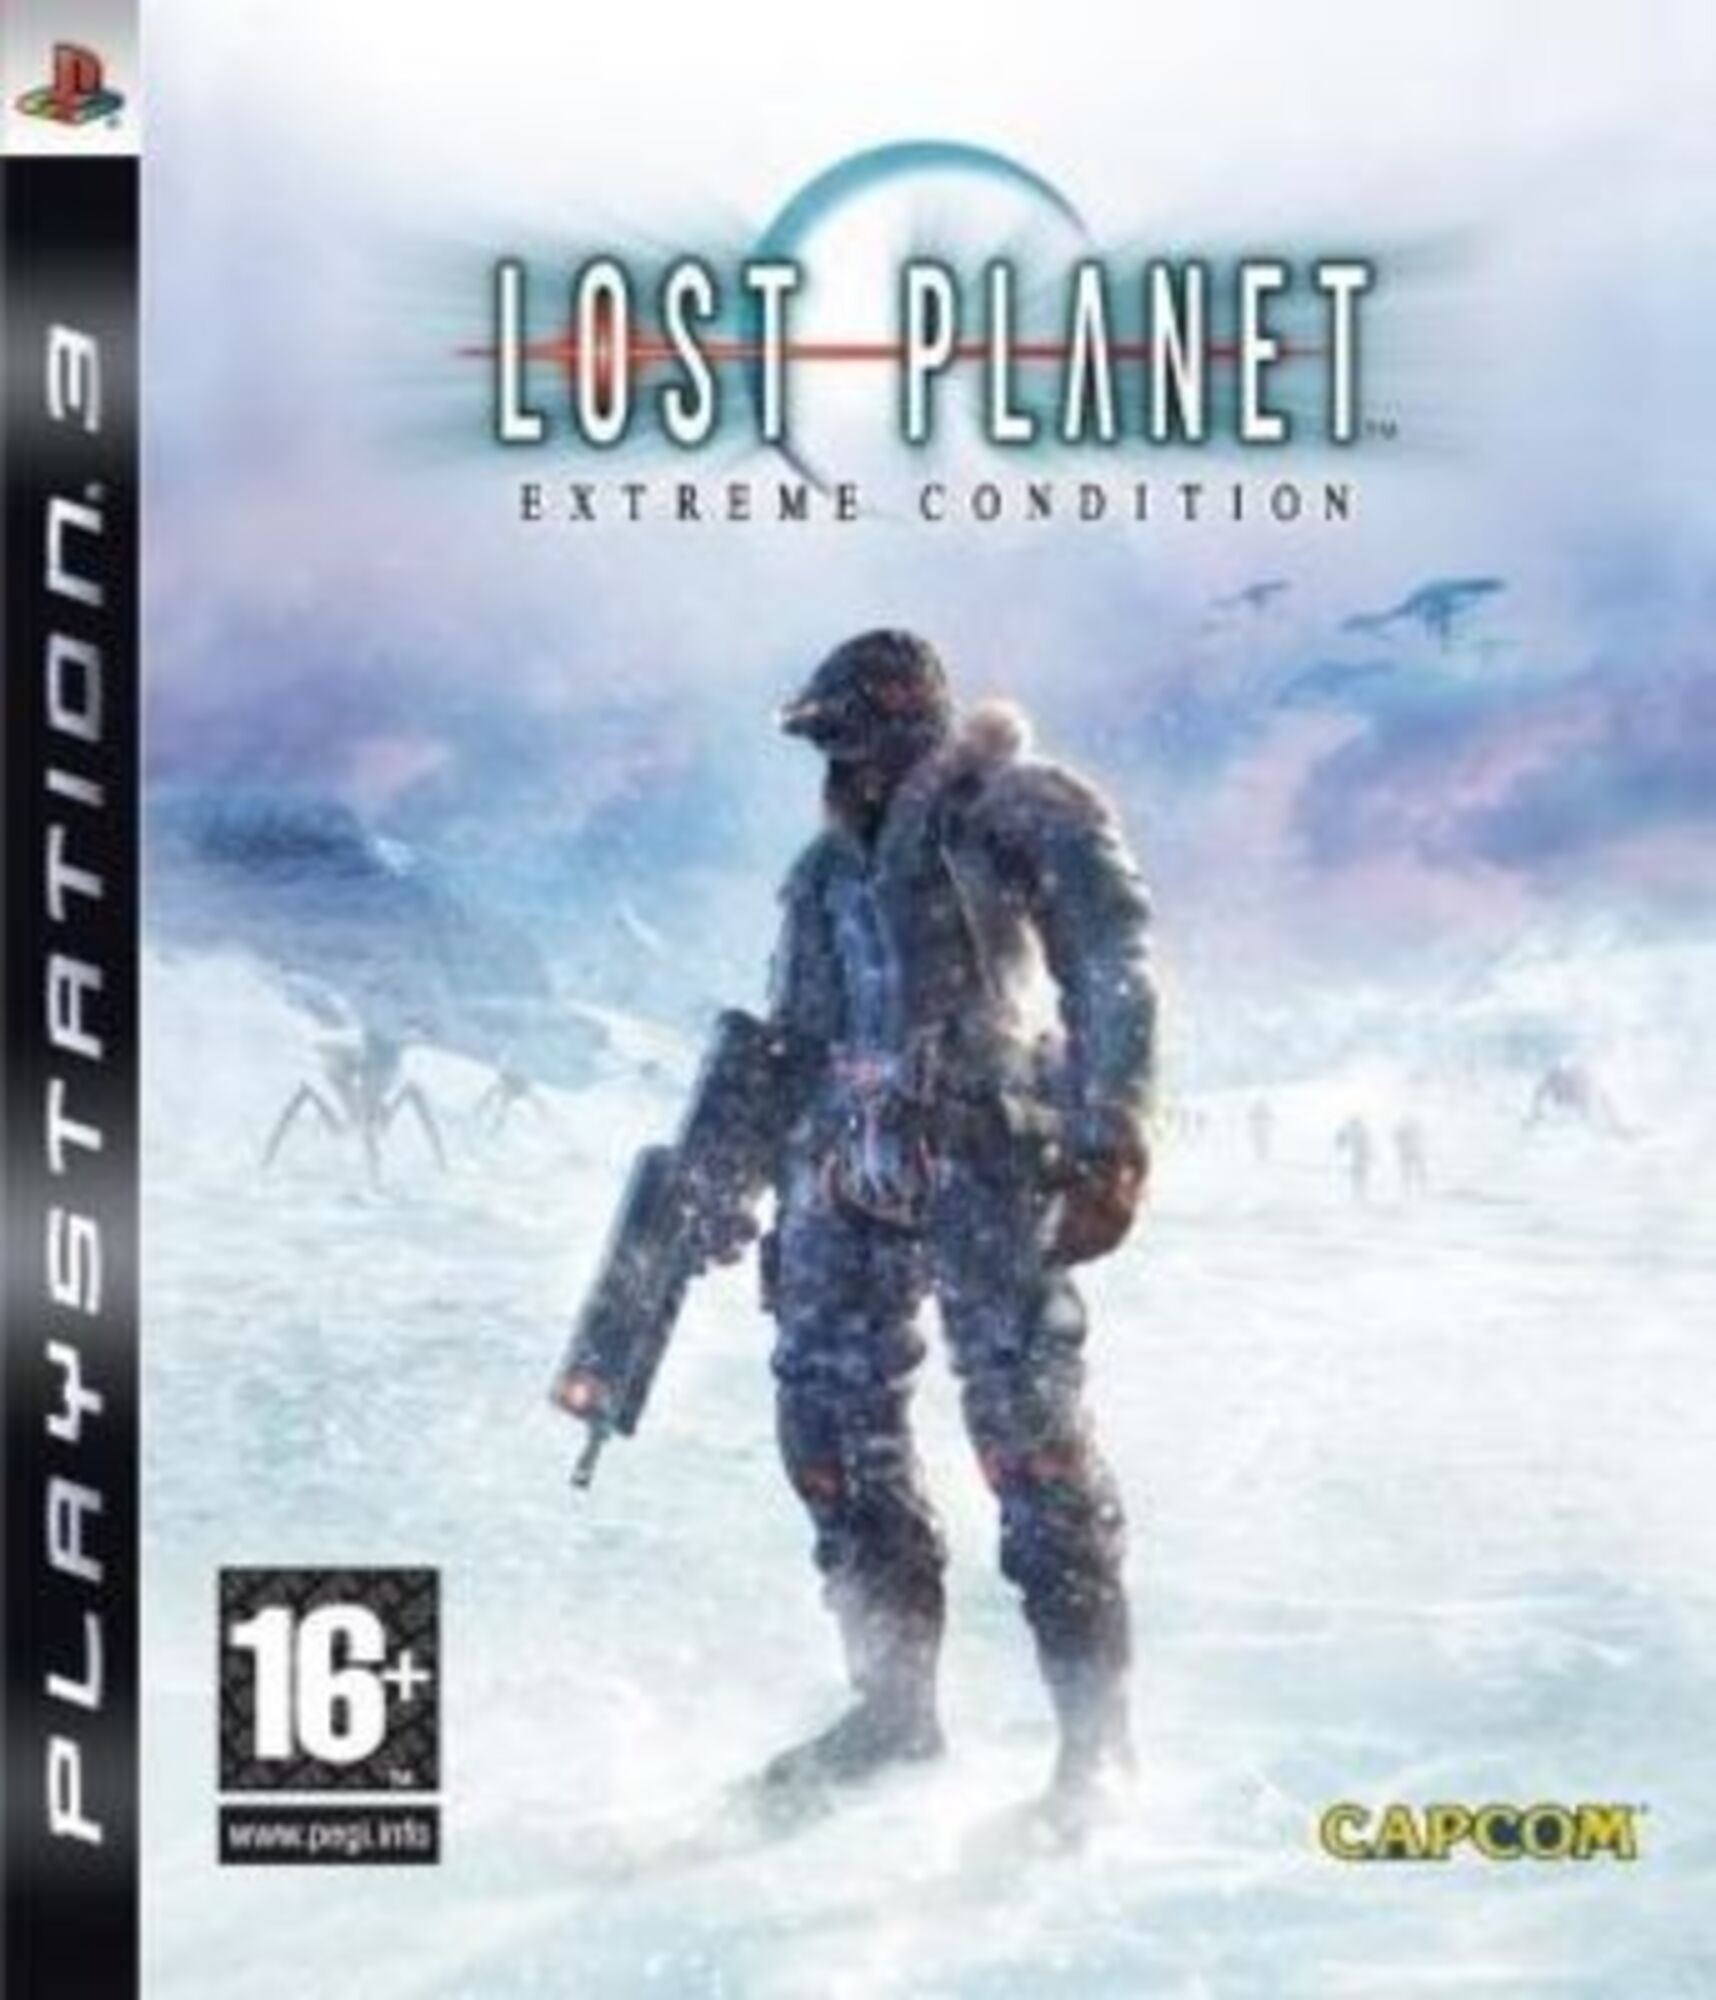 playstation 3 lost planet 2 download free